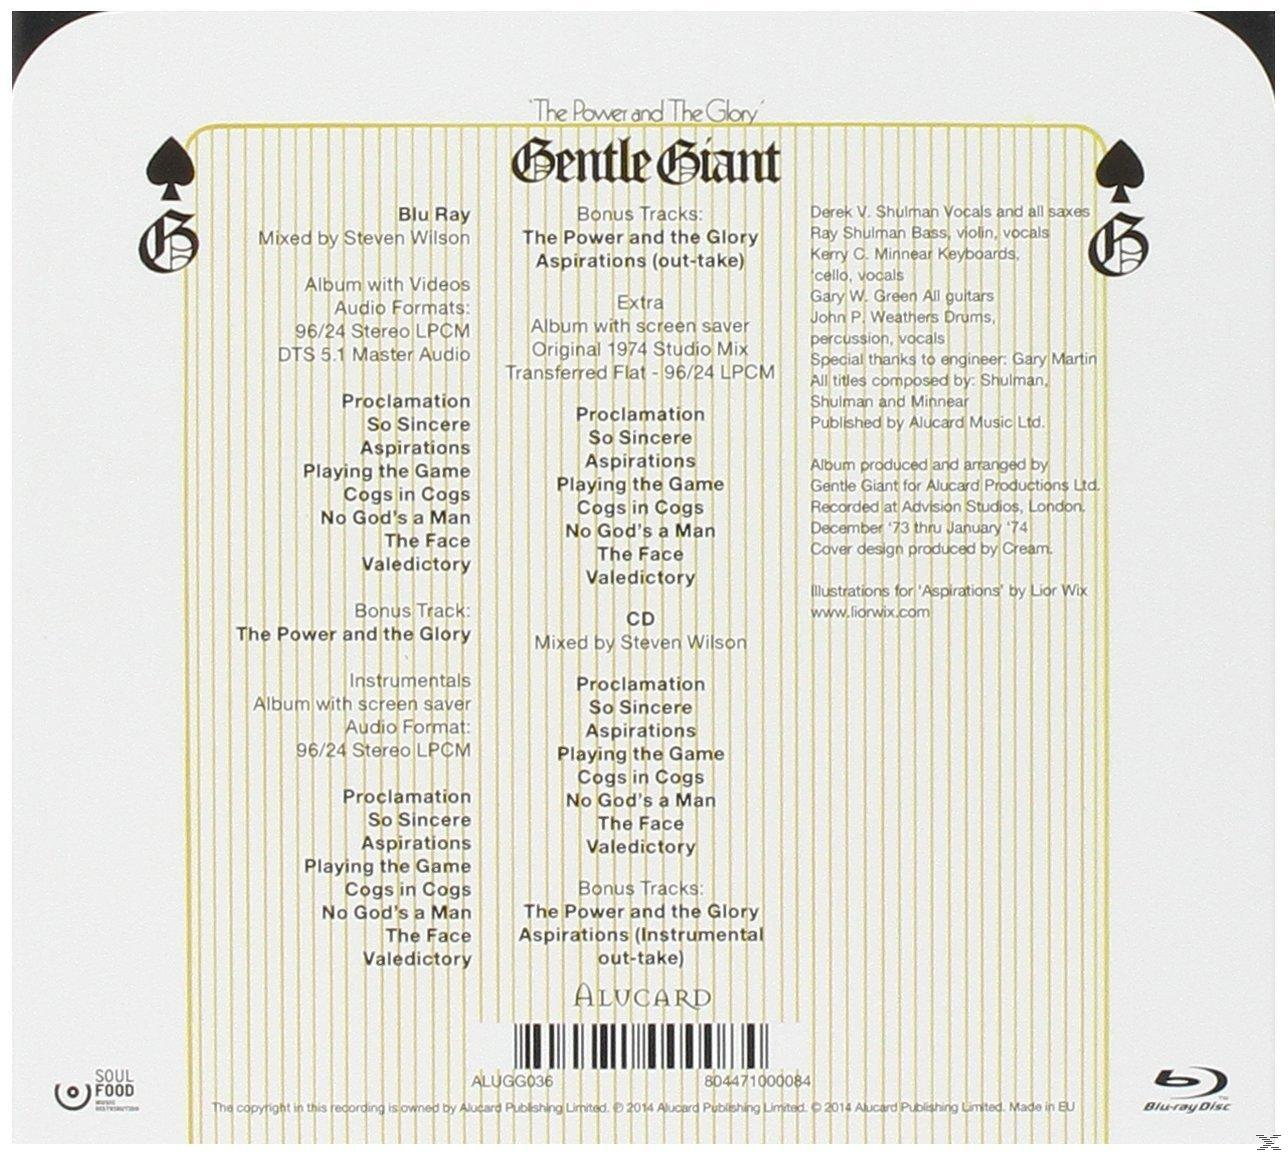 Gentle Giant - The Power Steven Glory Disc) - Wilson & (CD The Blu-ray + Mix) 2.0 (5.1 And